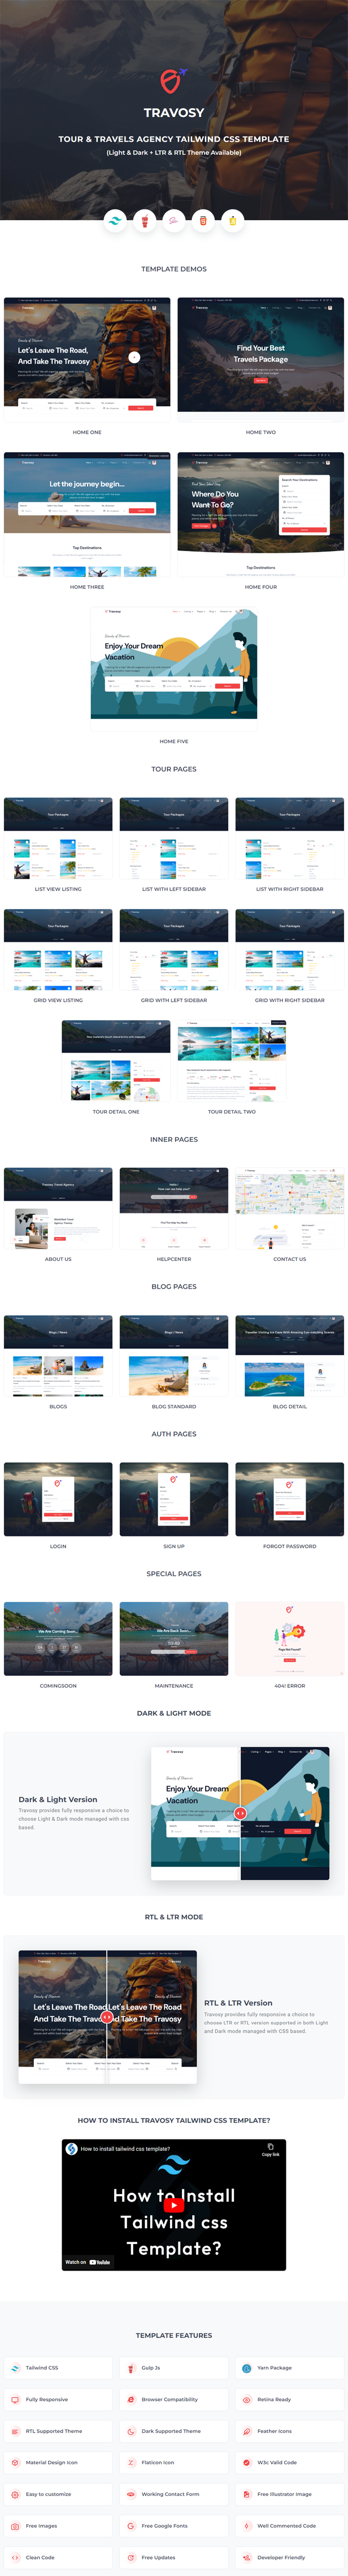 Travosy - Tour & Travel Agency Tailwind CSS HTML Template - 4